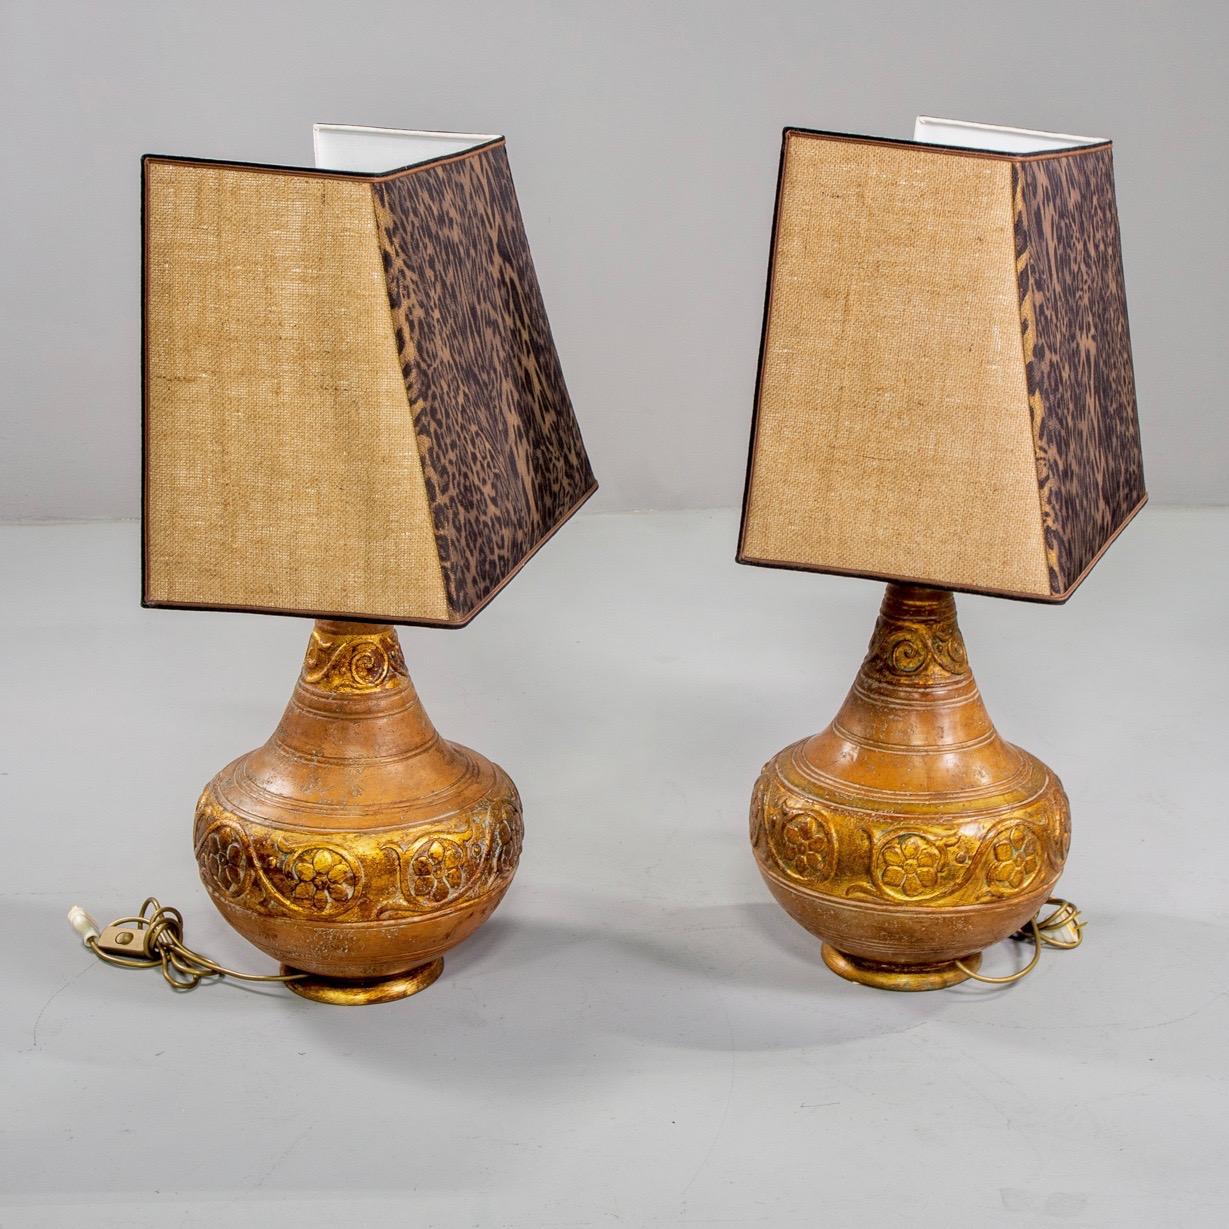 Pair of ceramic Italian lamps feature decorative bands of incised flowers and vines and a warm, Tuscan gold glaze circa 1970s. Custom shades are included and feature a front leopard print panel with natural colored burlap panels on sides. .